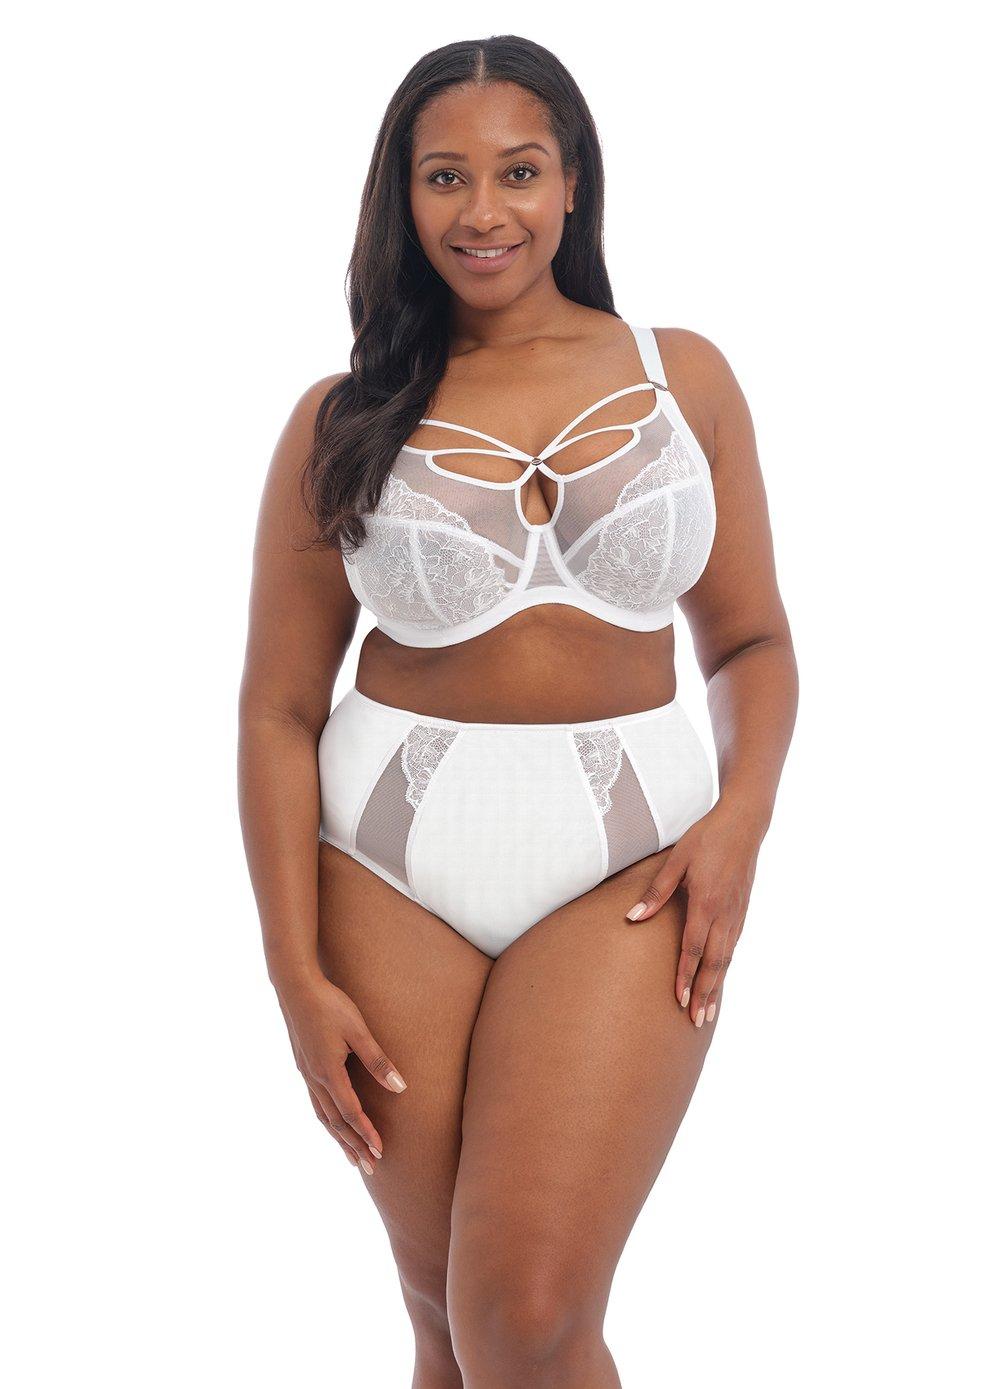 Bridal Lingerie for Full Bust and Plus Size Brides - The Breast Life